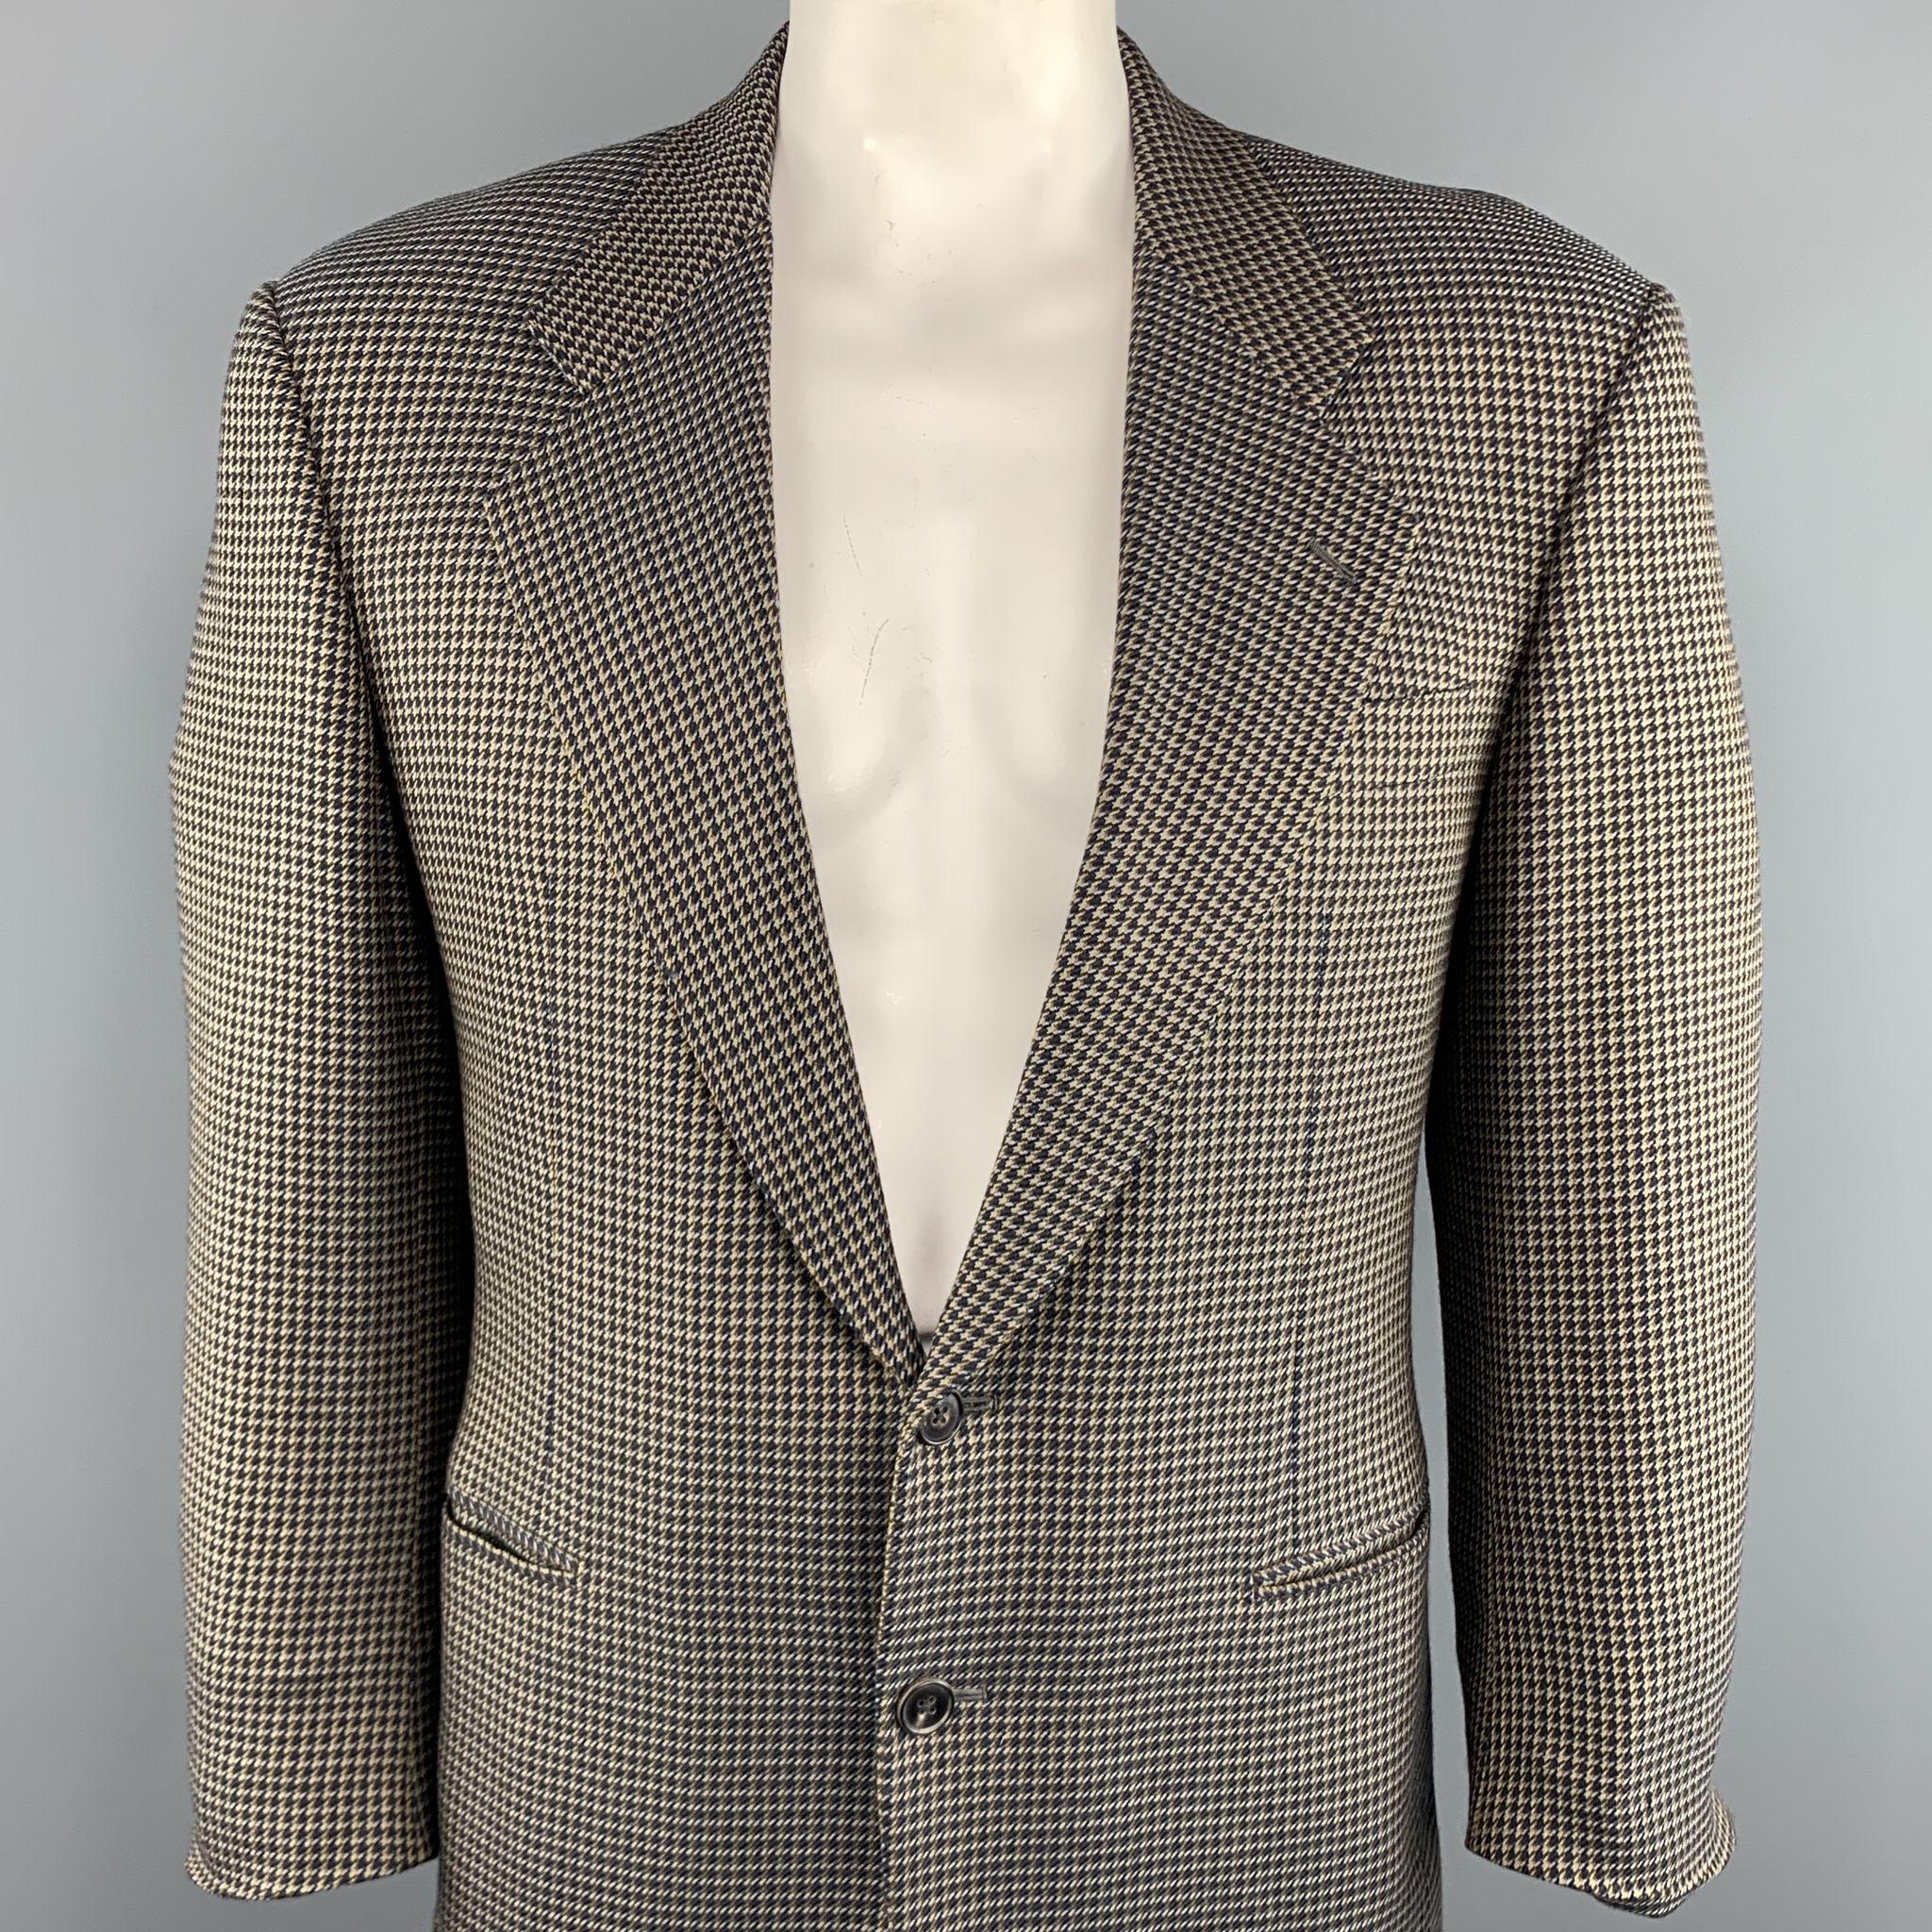 BELVEST Sport Coat comes in a brown & navy houndstooth wool featuring a notch lapel style, padded shoulders, slit pockets, and a two button closure. Made in Italy.

Excellent Pre-Owned Condition.
Marked: 50

Measurements:

Shoulder: 20 in. 
Chest: